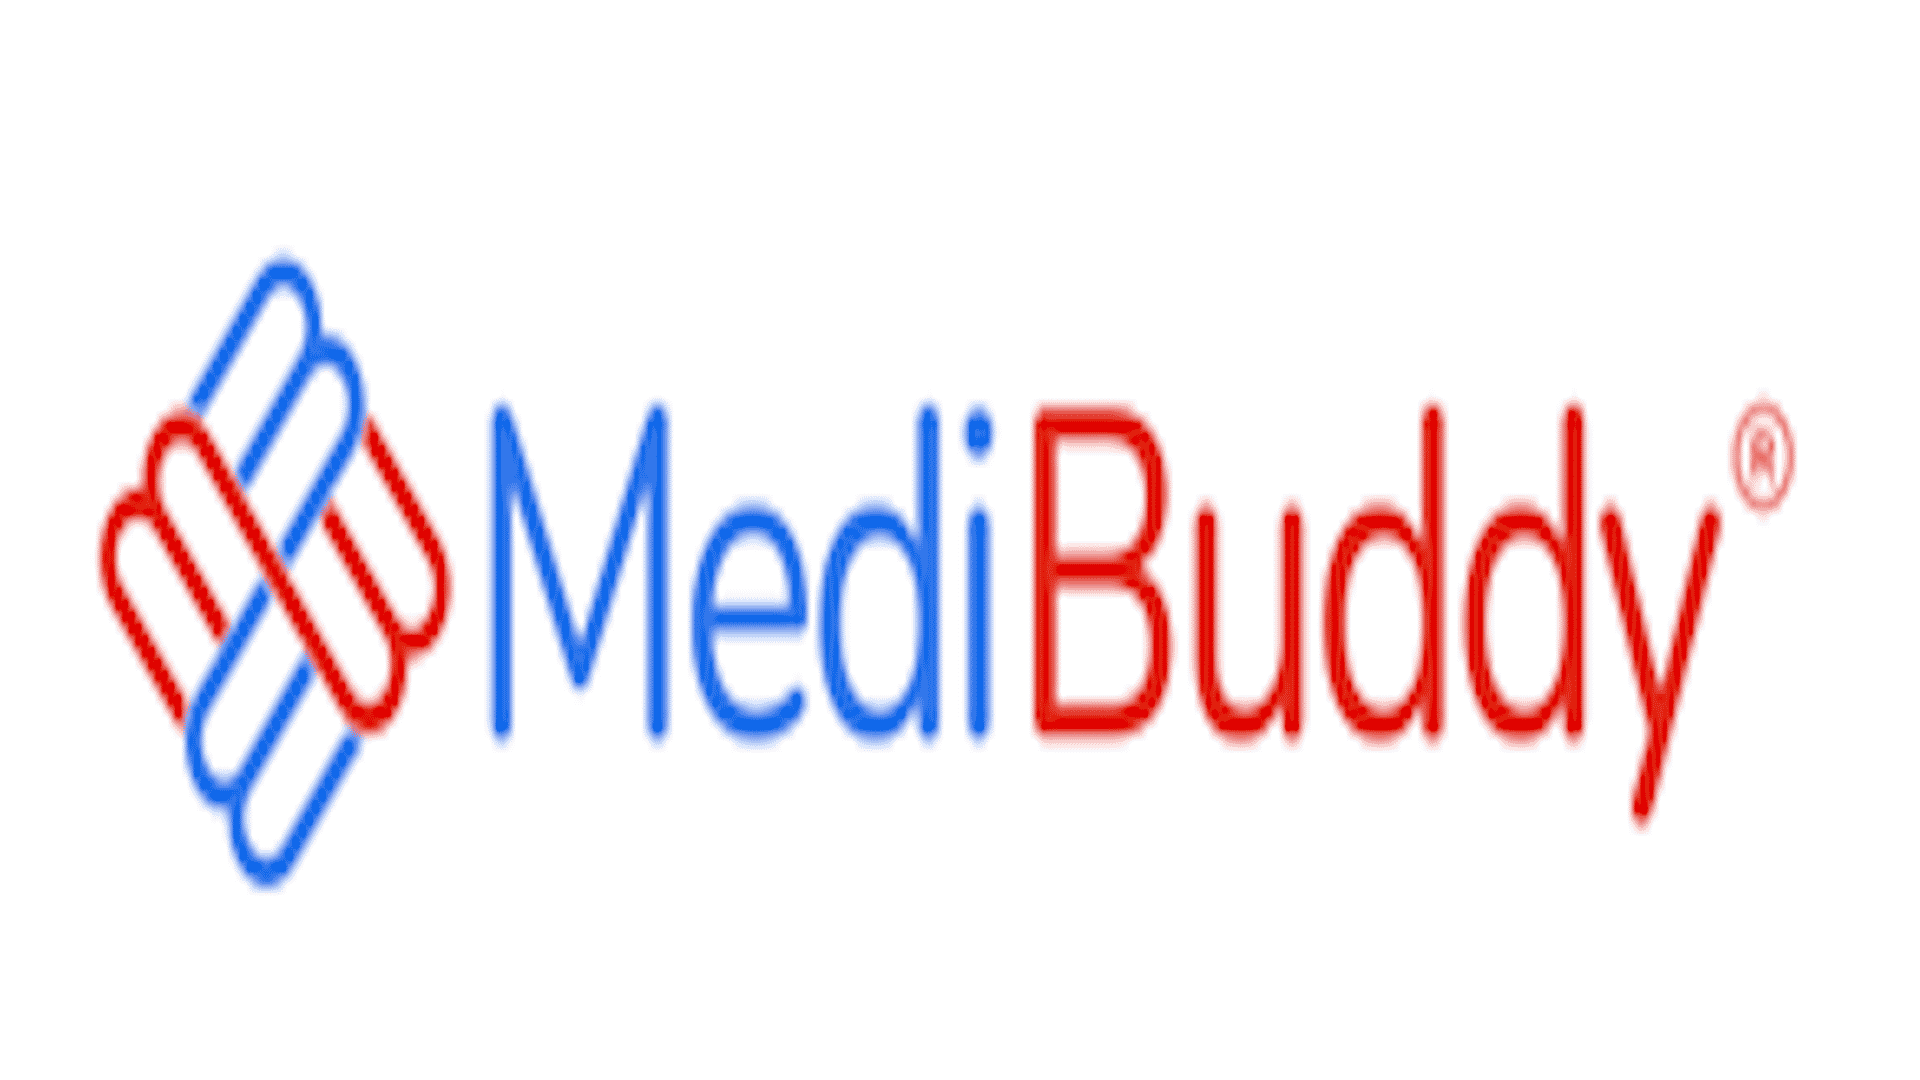 MediBuddy records an increase of 73 percent queries in pediatric consultations